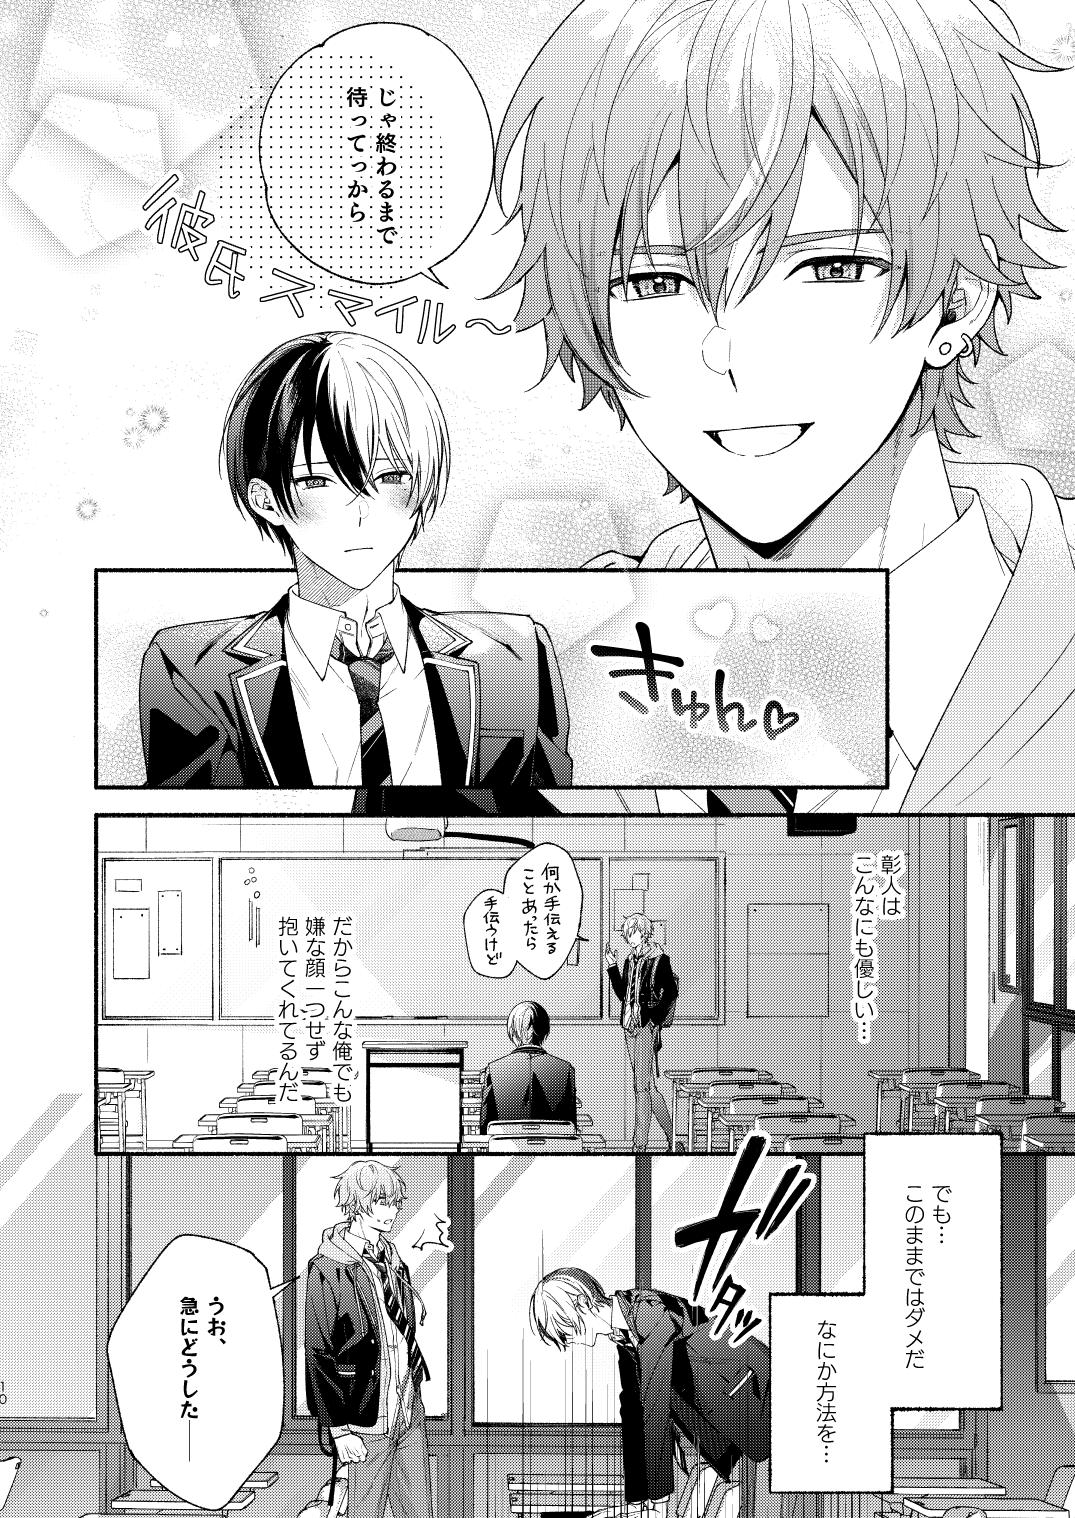 Suckingdick Chotto Renshuu Sasete Kure | Let me practice a little - Project sekai For - Page 9